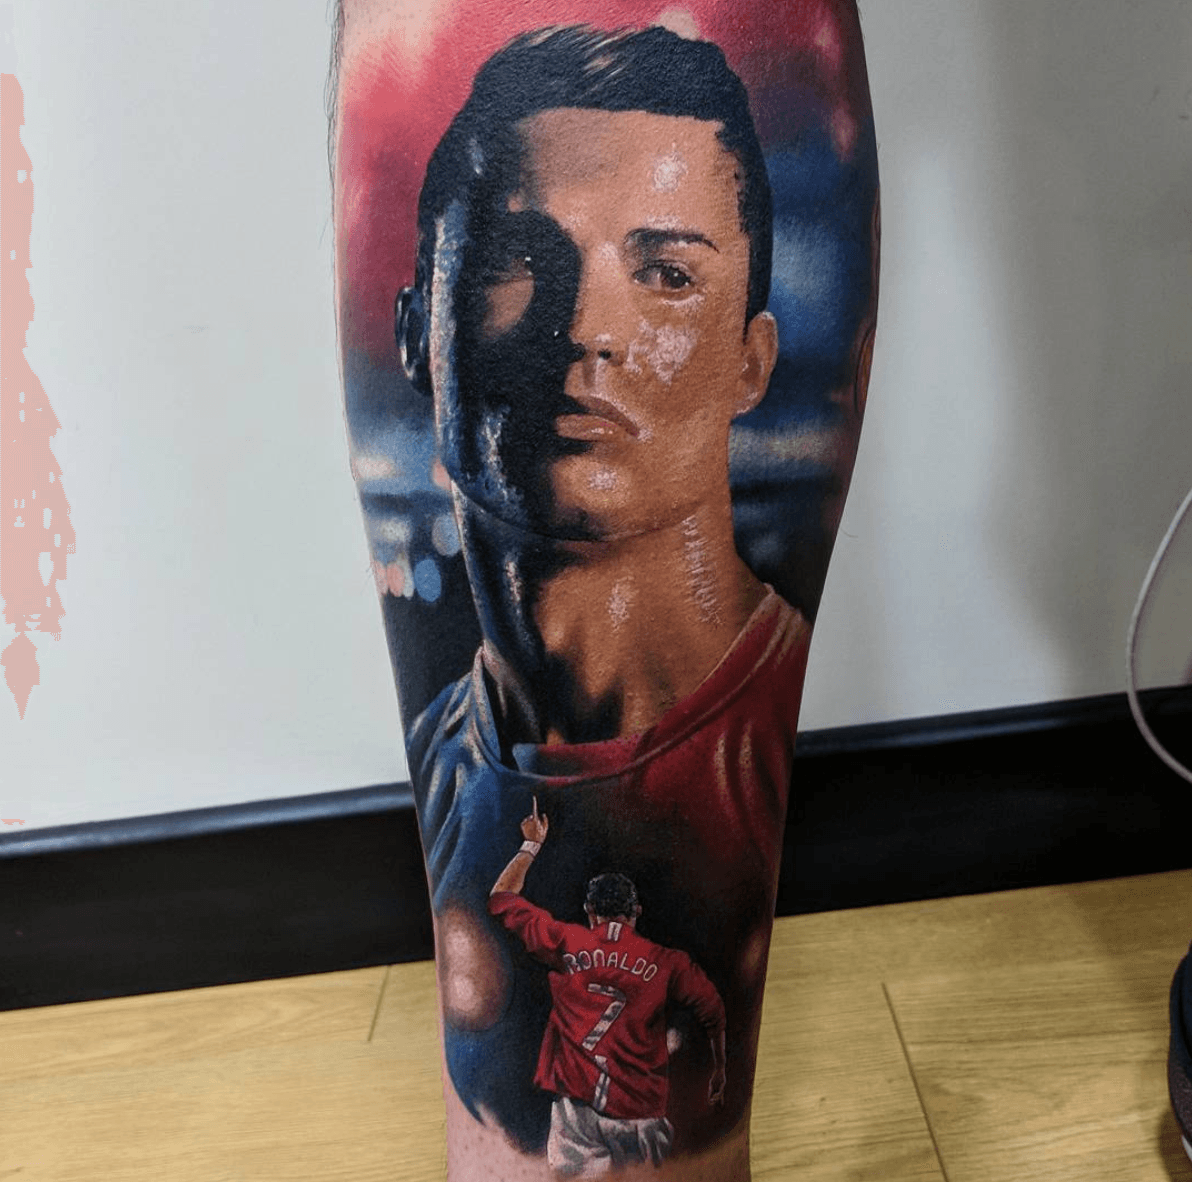 Football is My Drug Cristiano Ronaldo is My Dealer  Throwback to when  Junior got a tattoo of Cristiano doing Siii celebration on his arm   Cutest Thing ever   Facebook